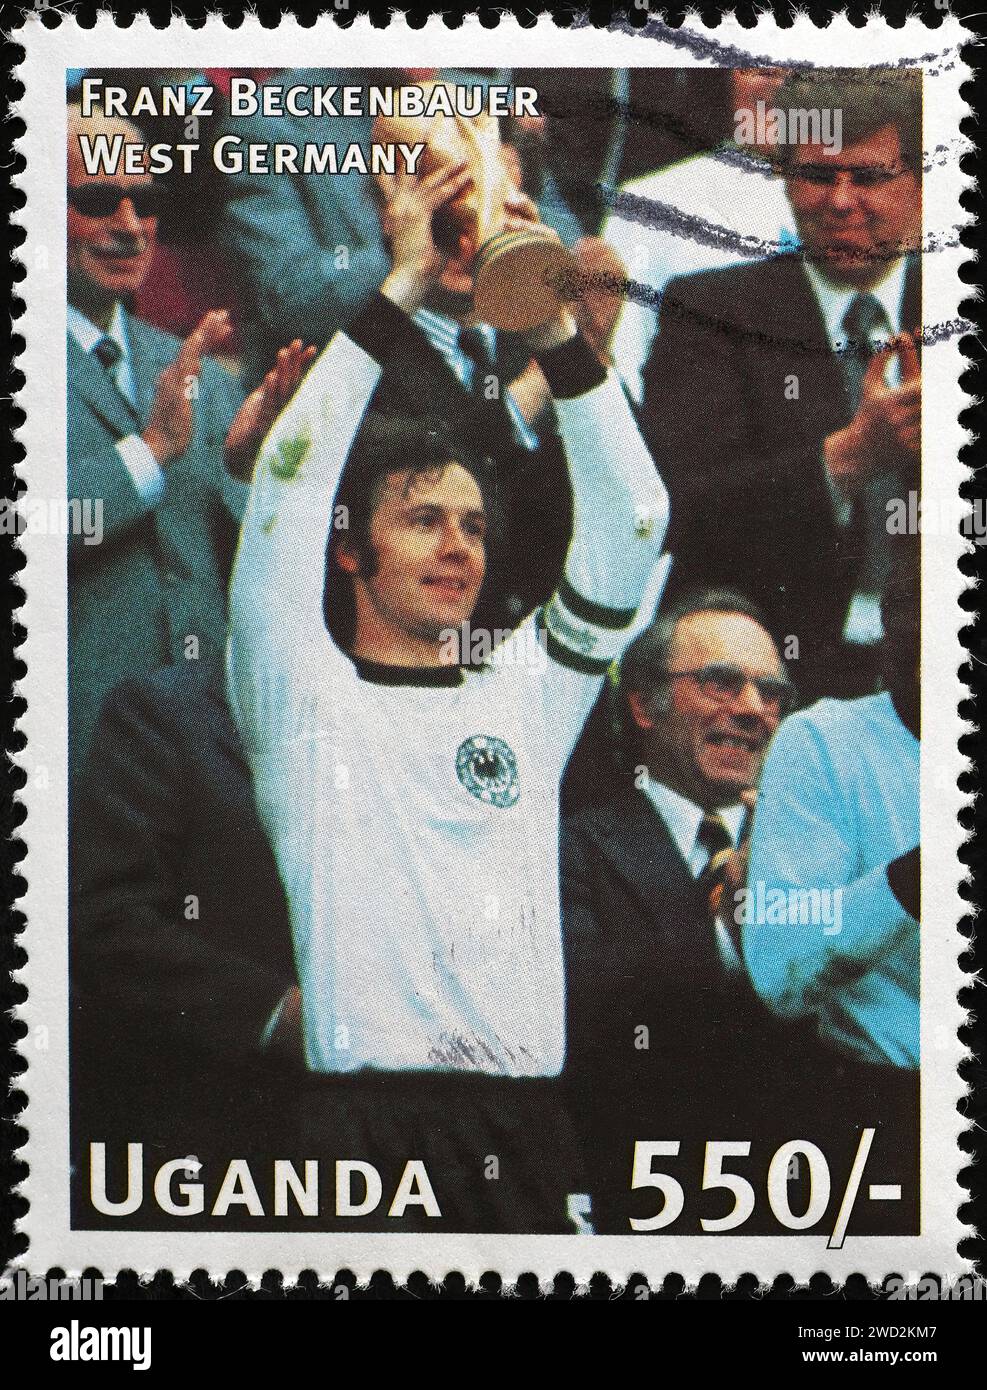 Franz Beckenbauer showing the World Cup trophy on stamp Stock Photo